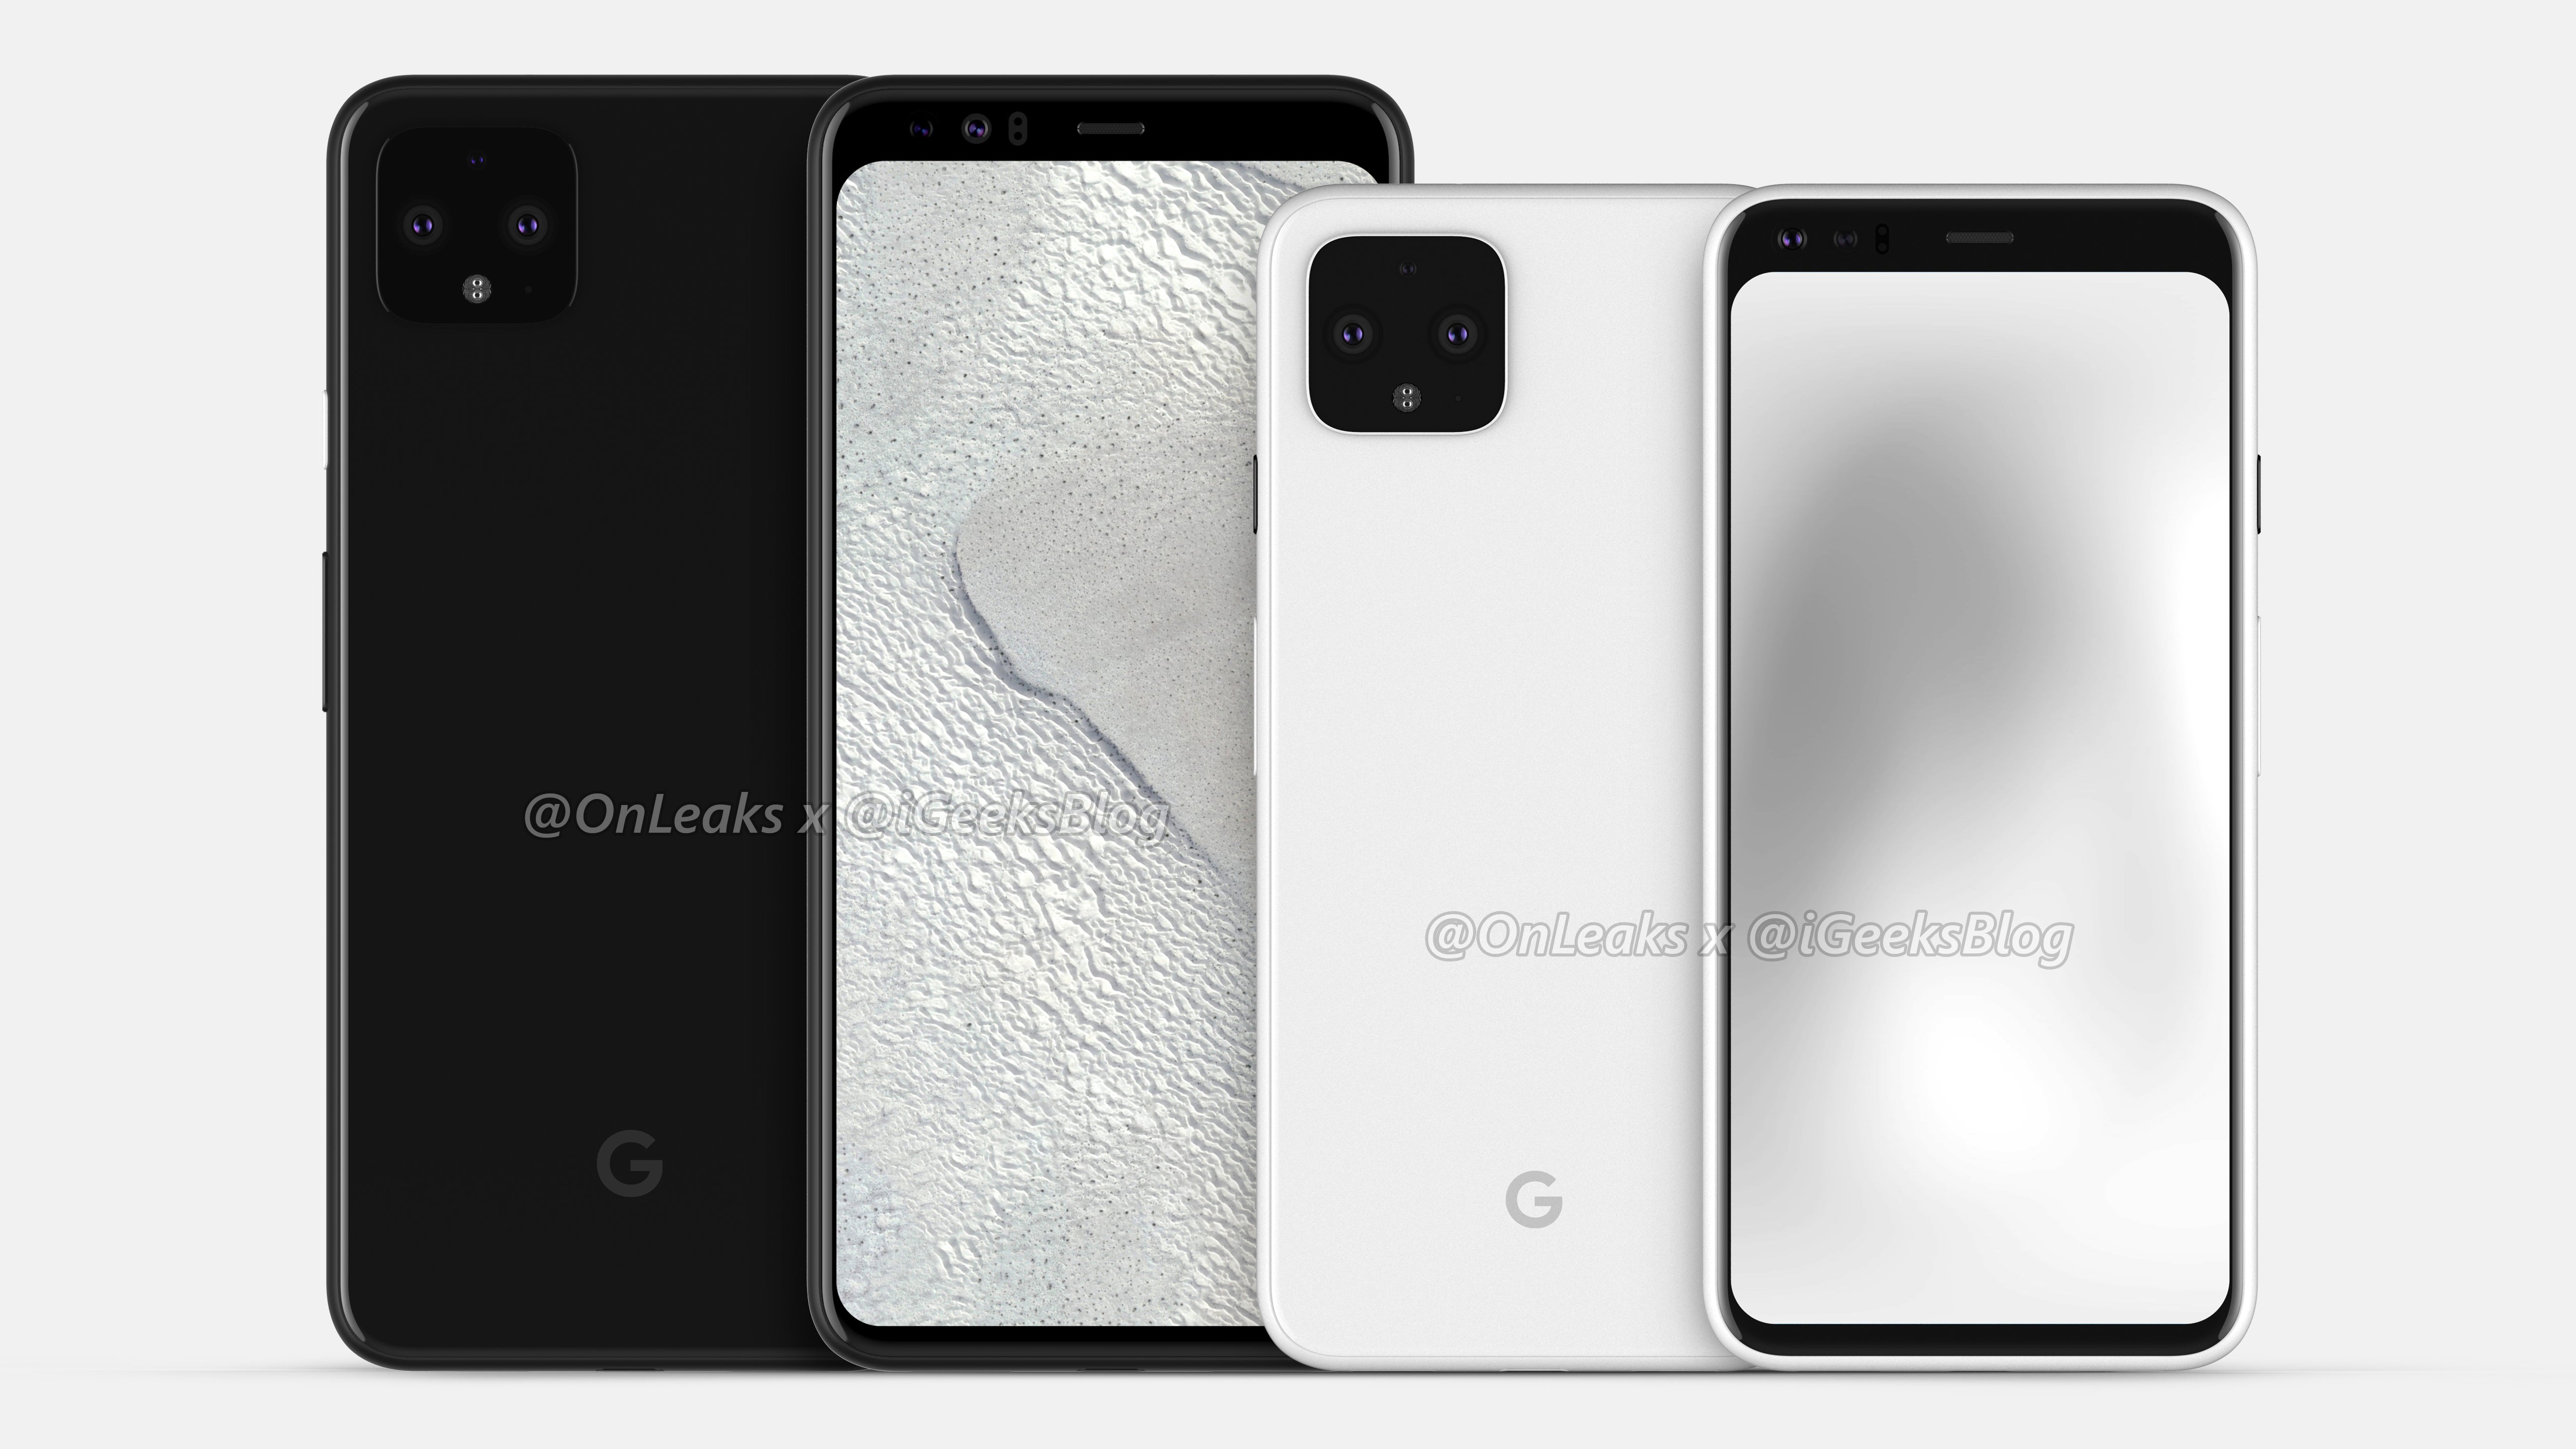 The Pixel 4 XL and Pixel 4 - Check out the latest Google Pixel 4 renders